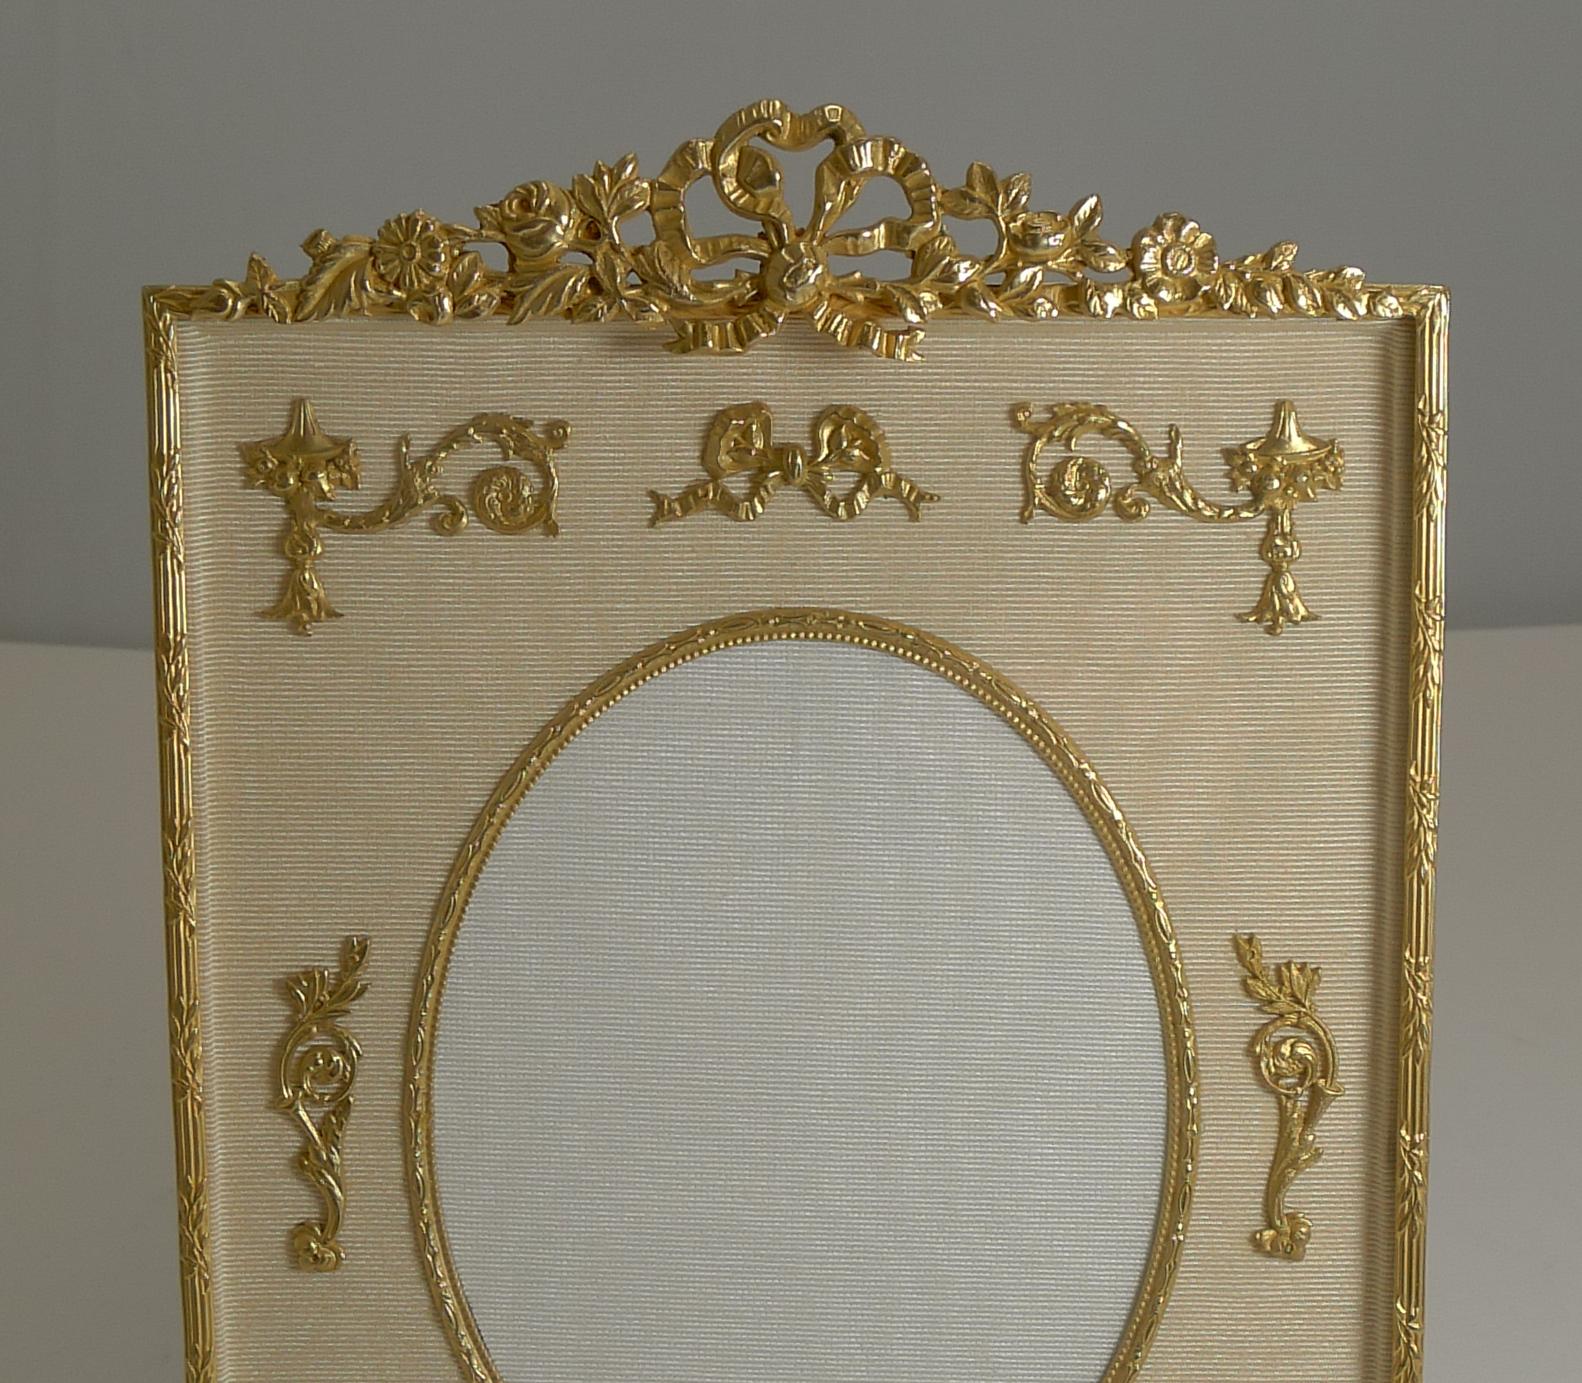 Pretty as a picture, this elegant French ormolu picture frame has been professionally restored to it's former glory, dating to circa 1900.

The top of the frame has a stunning gilded bronze ribbon and bow mount with exquisite mounts adorning the